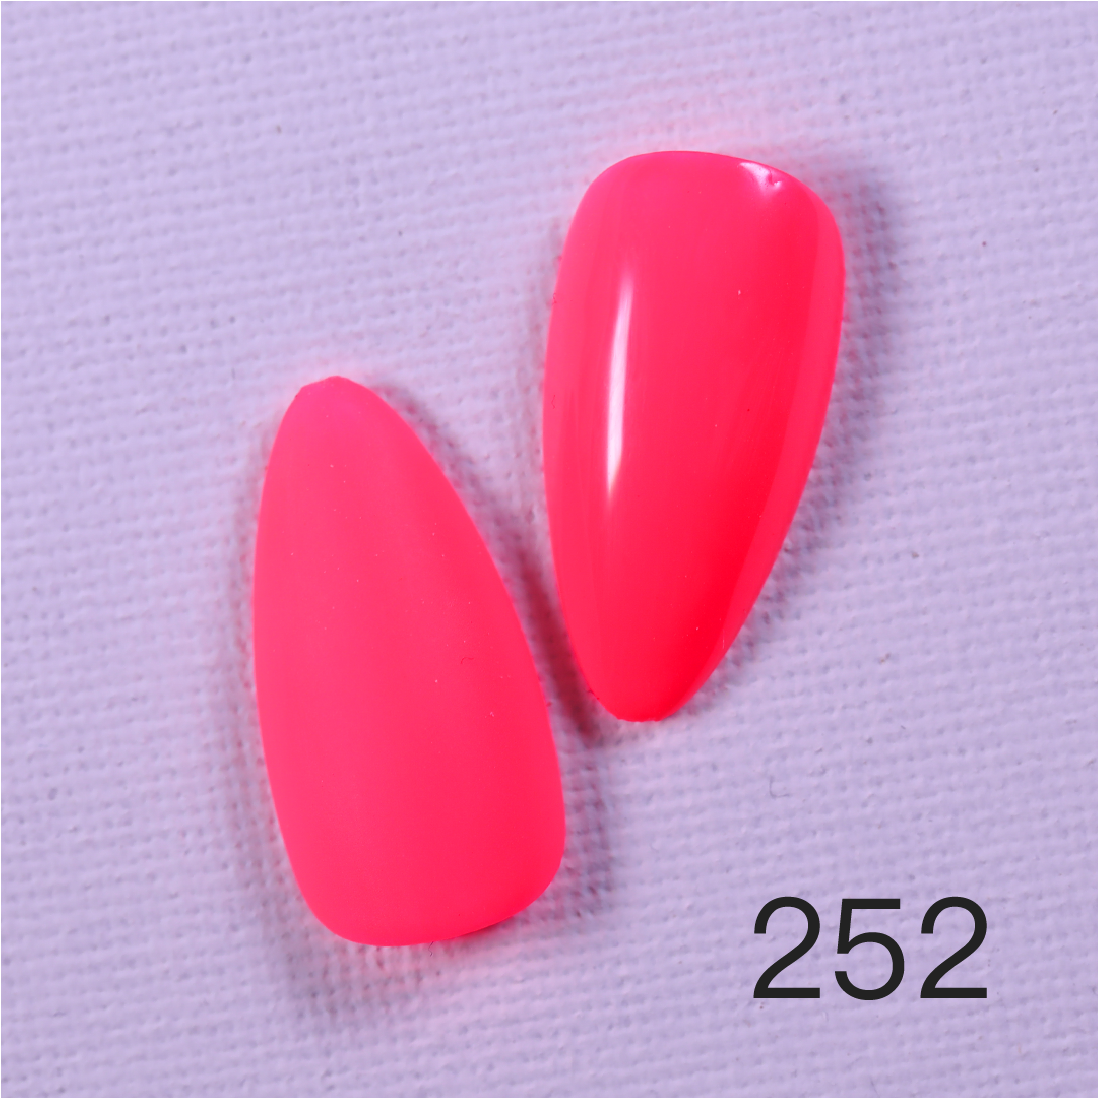 {{ GelPolish_USA }} {{ magnetic_gelpolish}} 252 {{ Gelpolish_usa}} {{ Gel_polish}} Mela Mela Gel Polish Colour - 80 colors available to choose from - {{ UV_Drying_machine}} - {{ Powerful_LED_Nail_Dryer}} {{ Gelish }} {{Gel_nail_polish}} {{ Orly}}